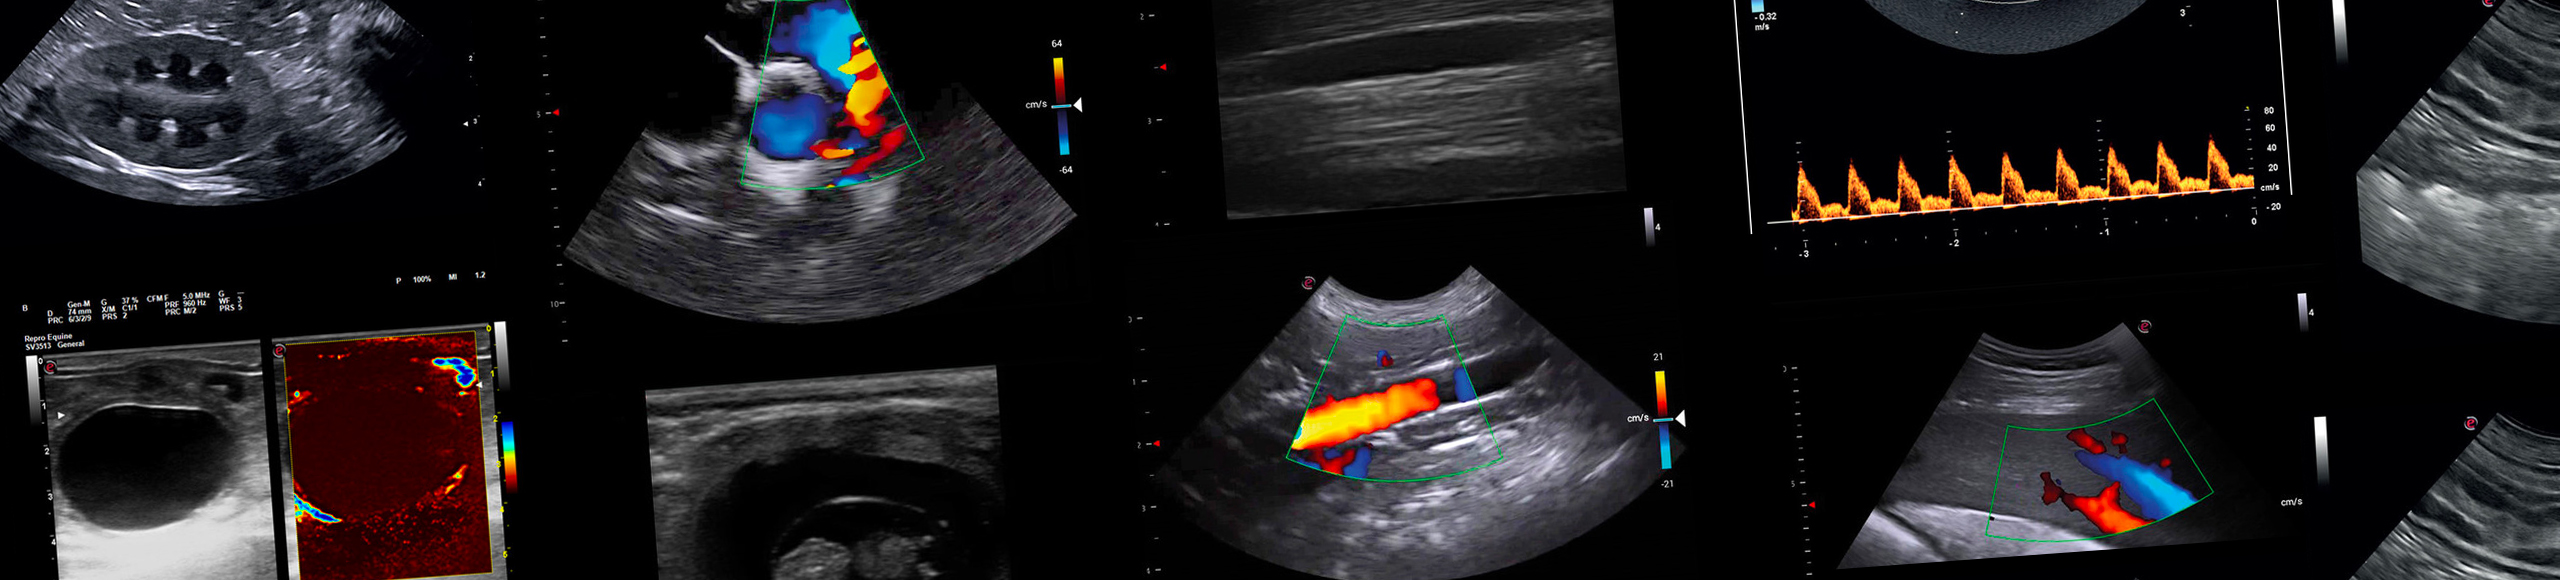 Ultrasound clinical images